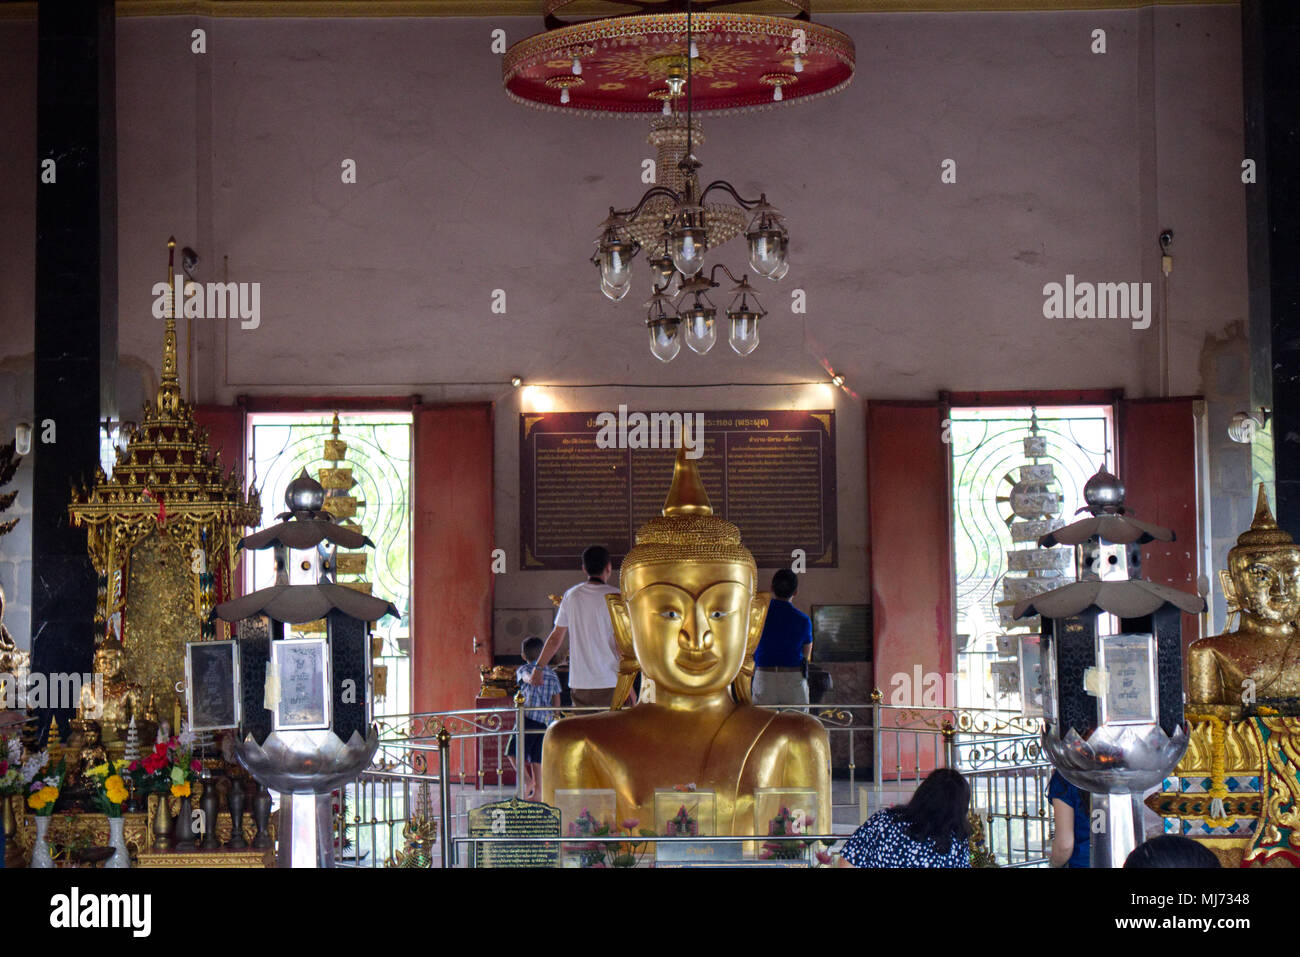 Thaland, Phuket / Thailand  - April 11 2018 : A young man is posing for a photograph in front of a gold statue of Buddha in the Wat Phra Tong Temple Stock Photo